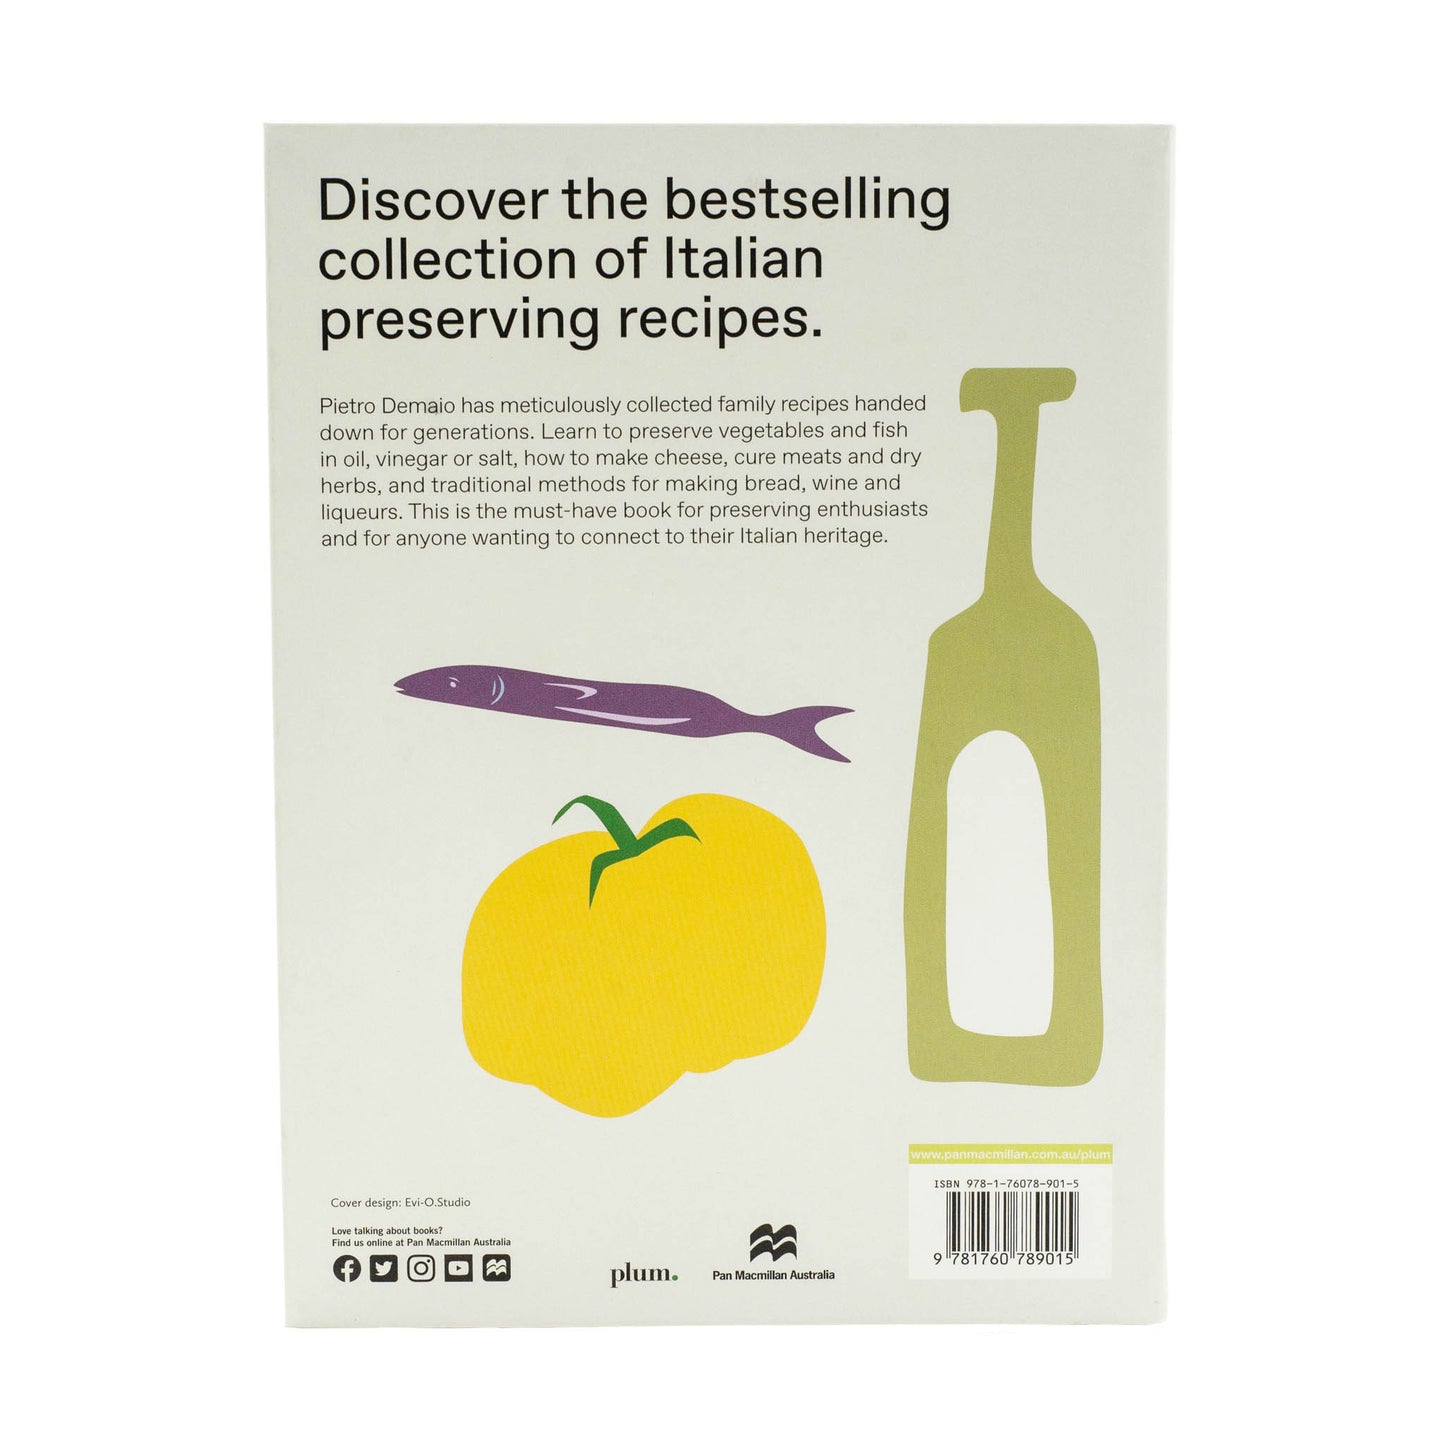 A book with an impressive range of old-style recipes from regional Italy, with easy-to-follow instructions for preserving fruit, vegetables, fish and meat. Includes dozens of recipes for pickles, syrups, wine, cheese, salami, prosciutto, liqueurs, pesto and sauces. Written by Pietro Demaio